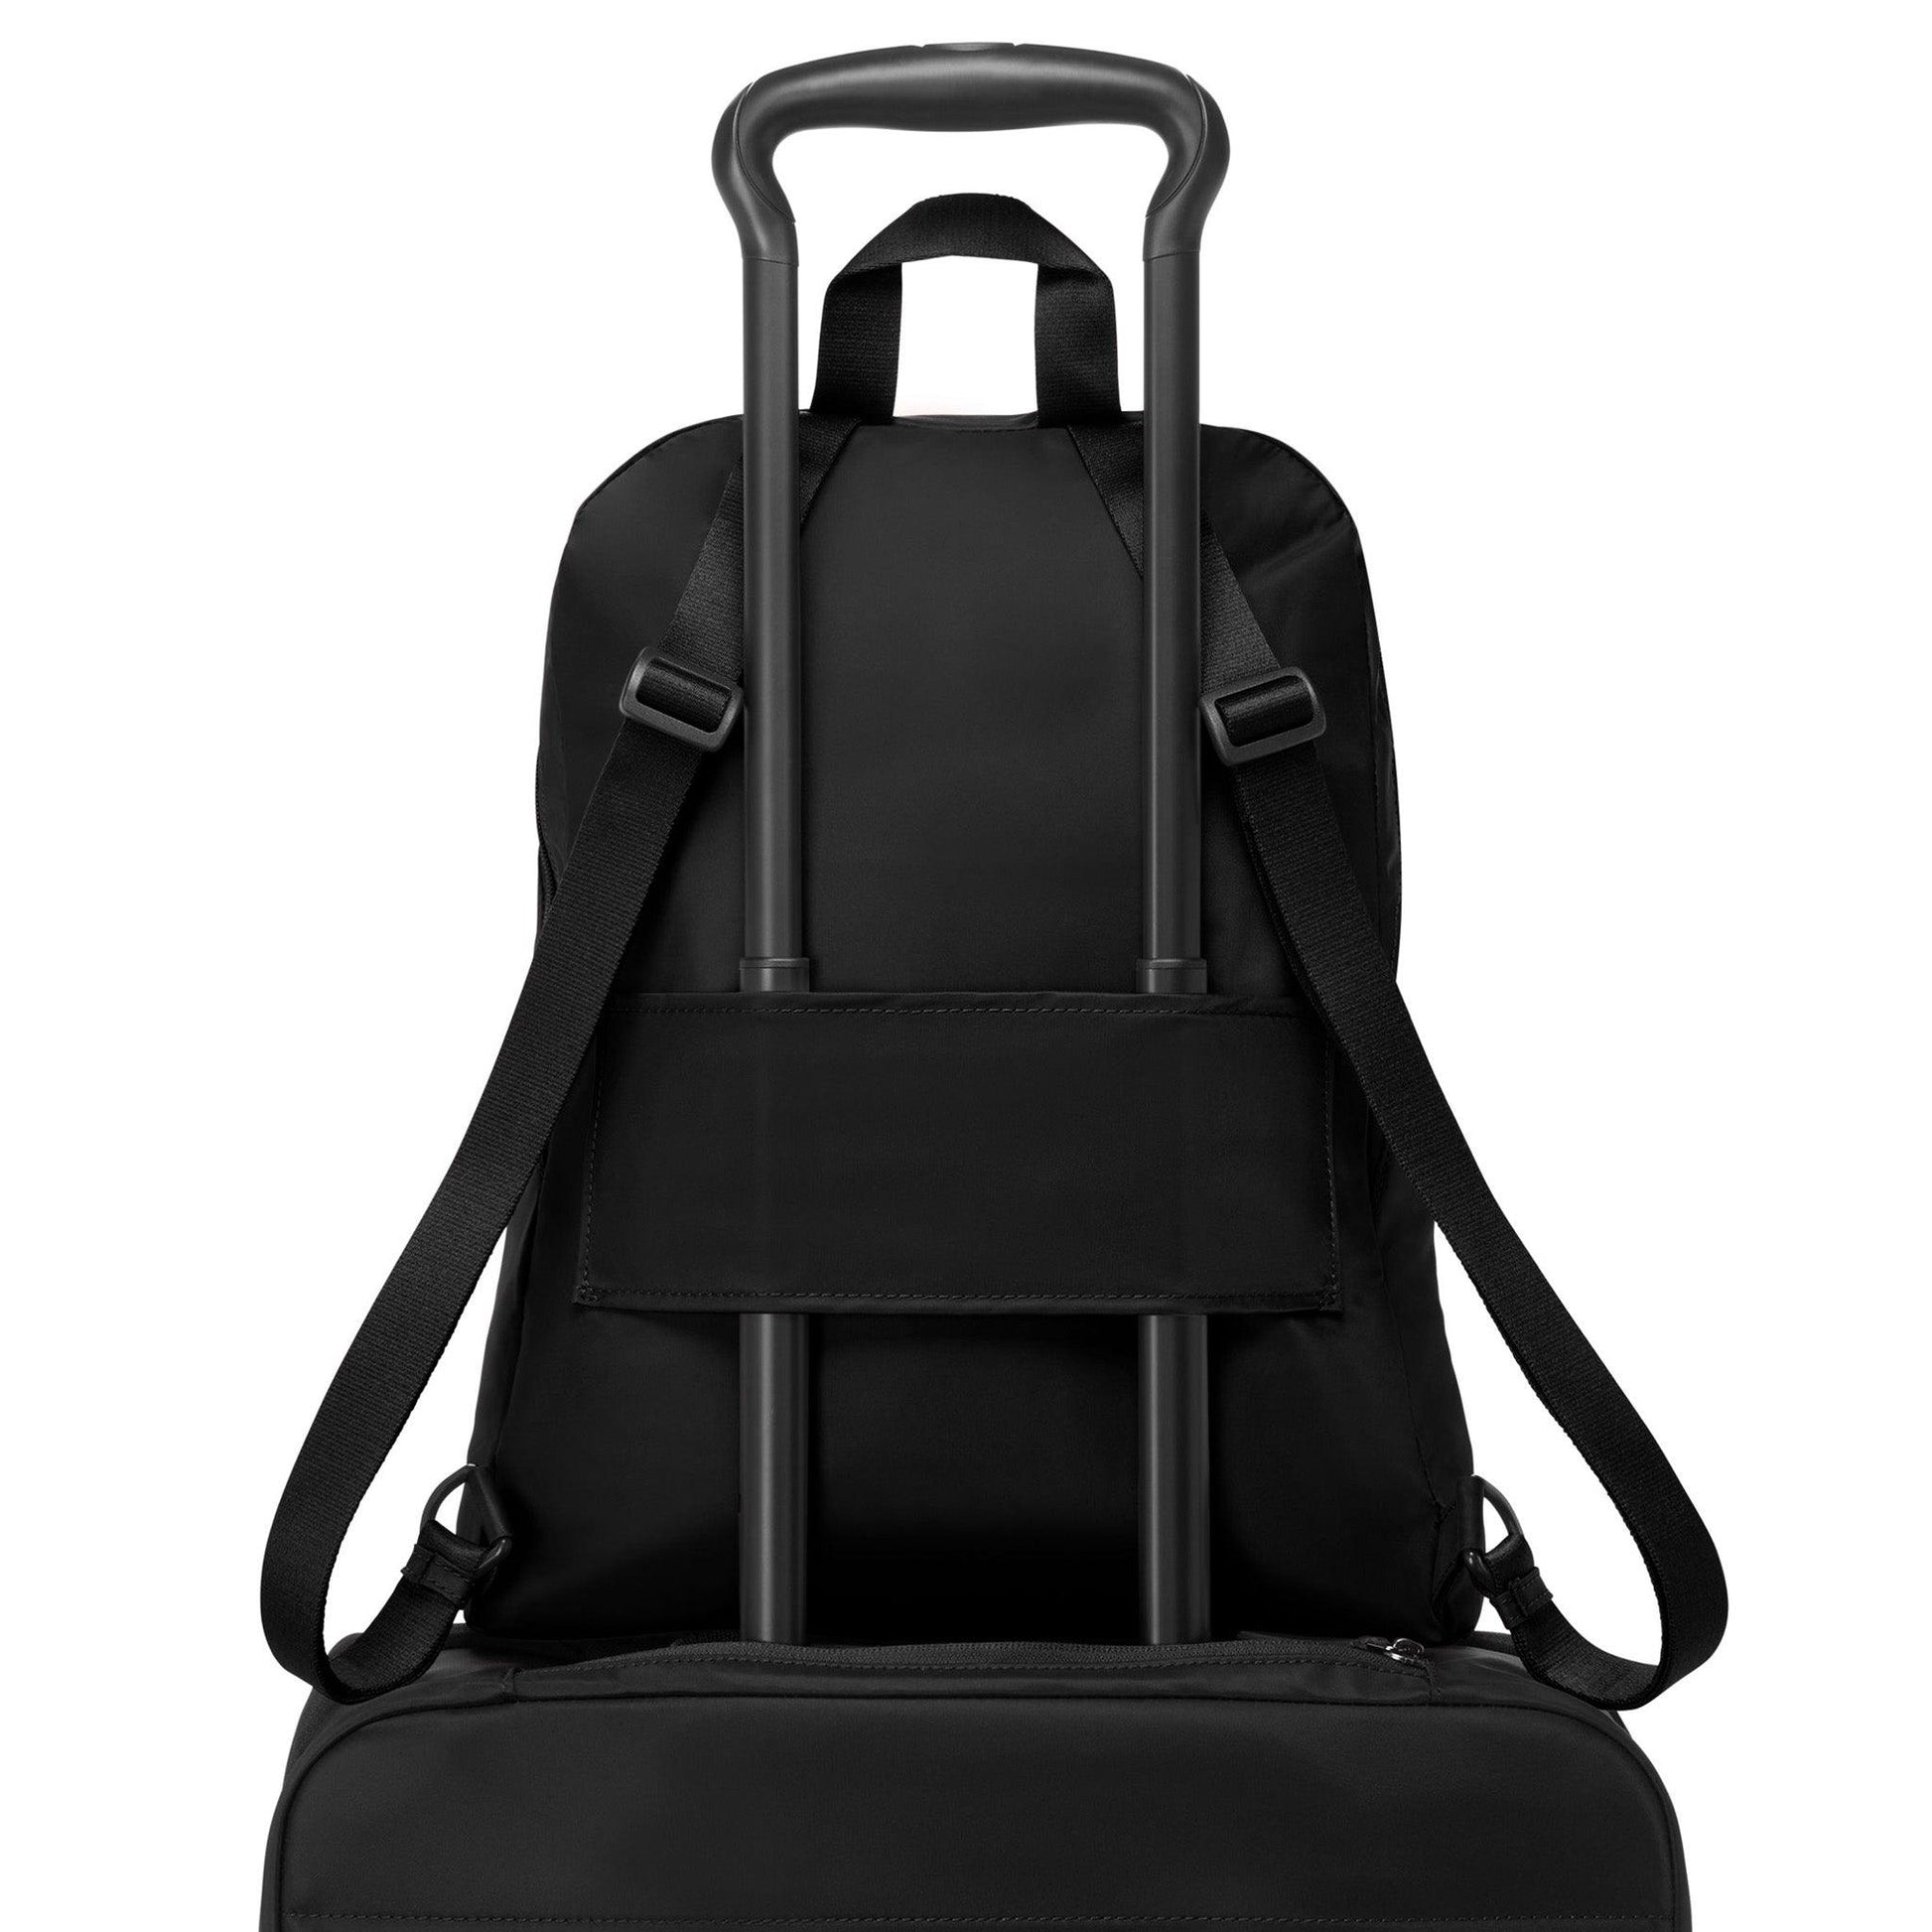 Just In Case® Backpack - Black/Gold - Cosmos Boutique New Jersey